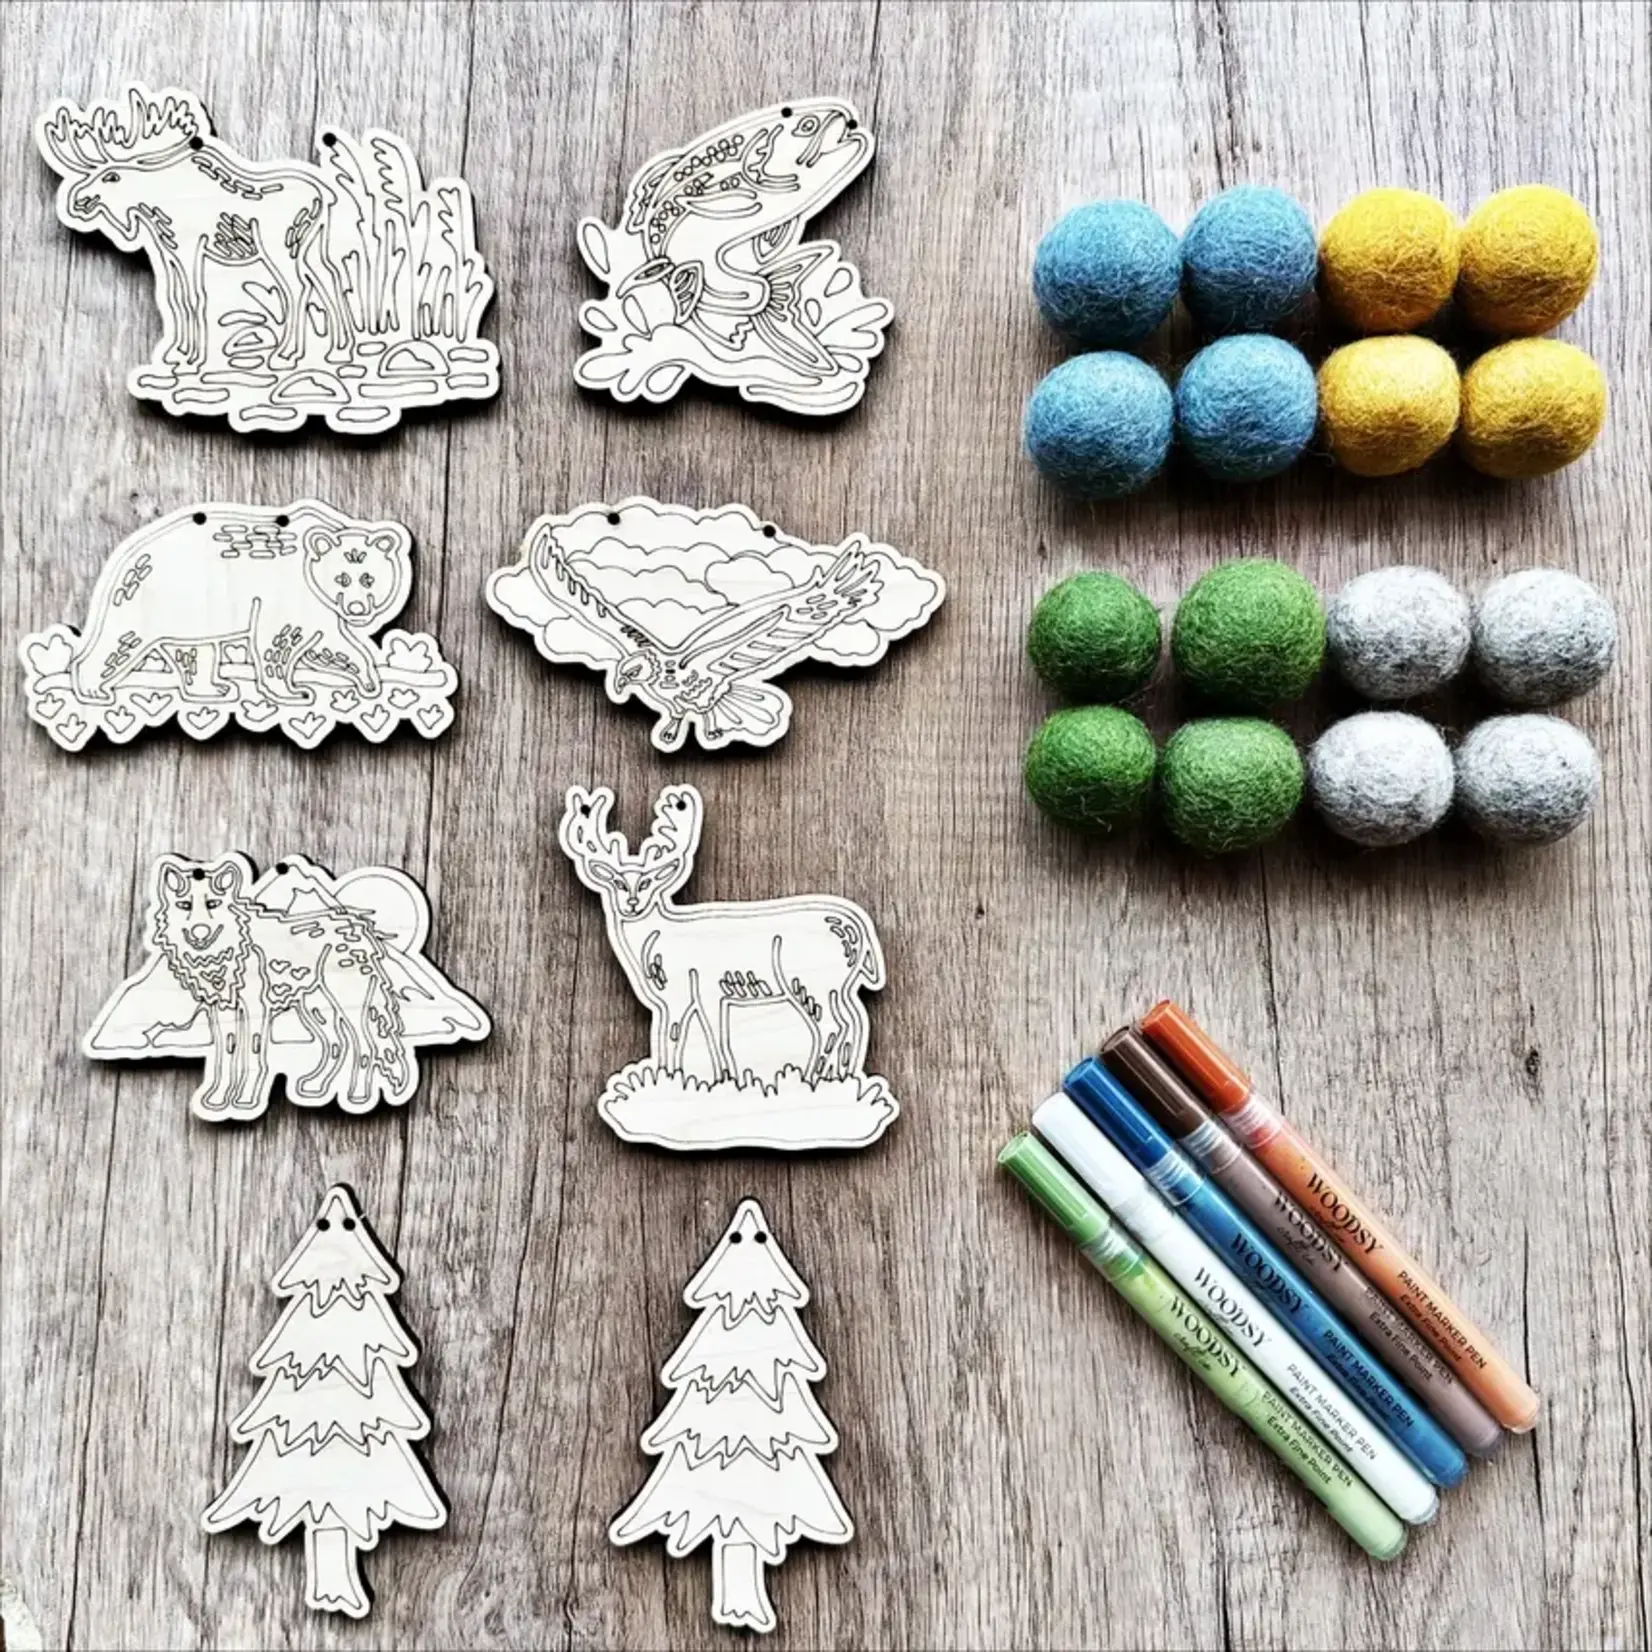 The Woodsy Craft Co The Wilderness Garland Kit